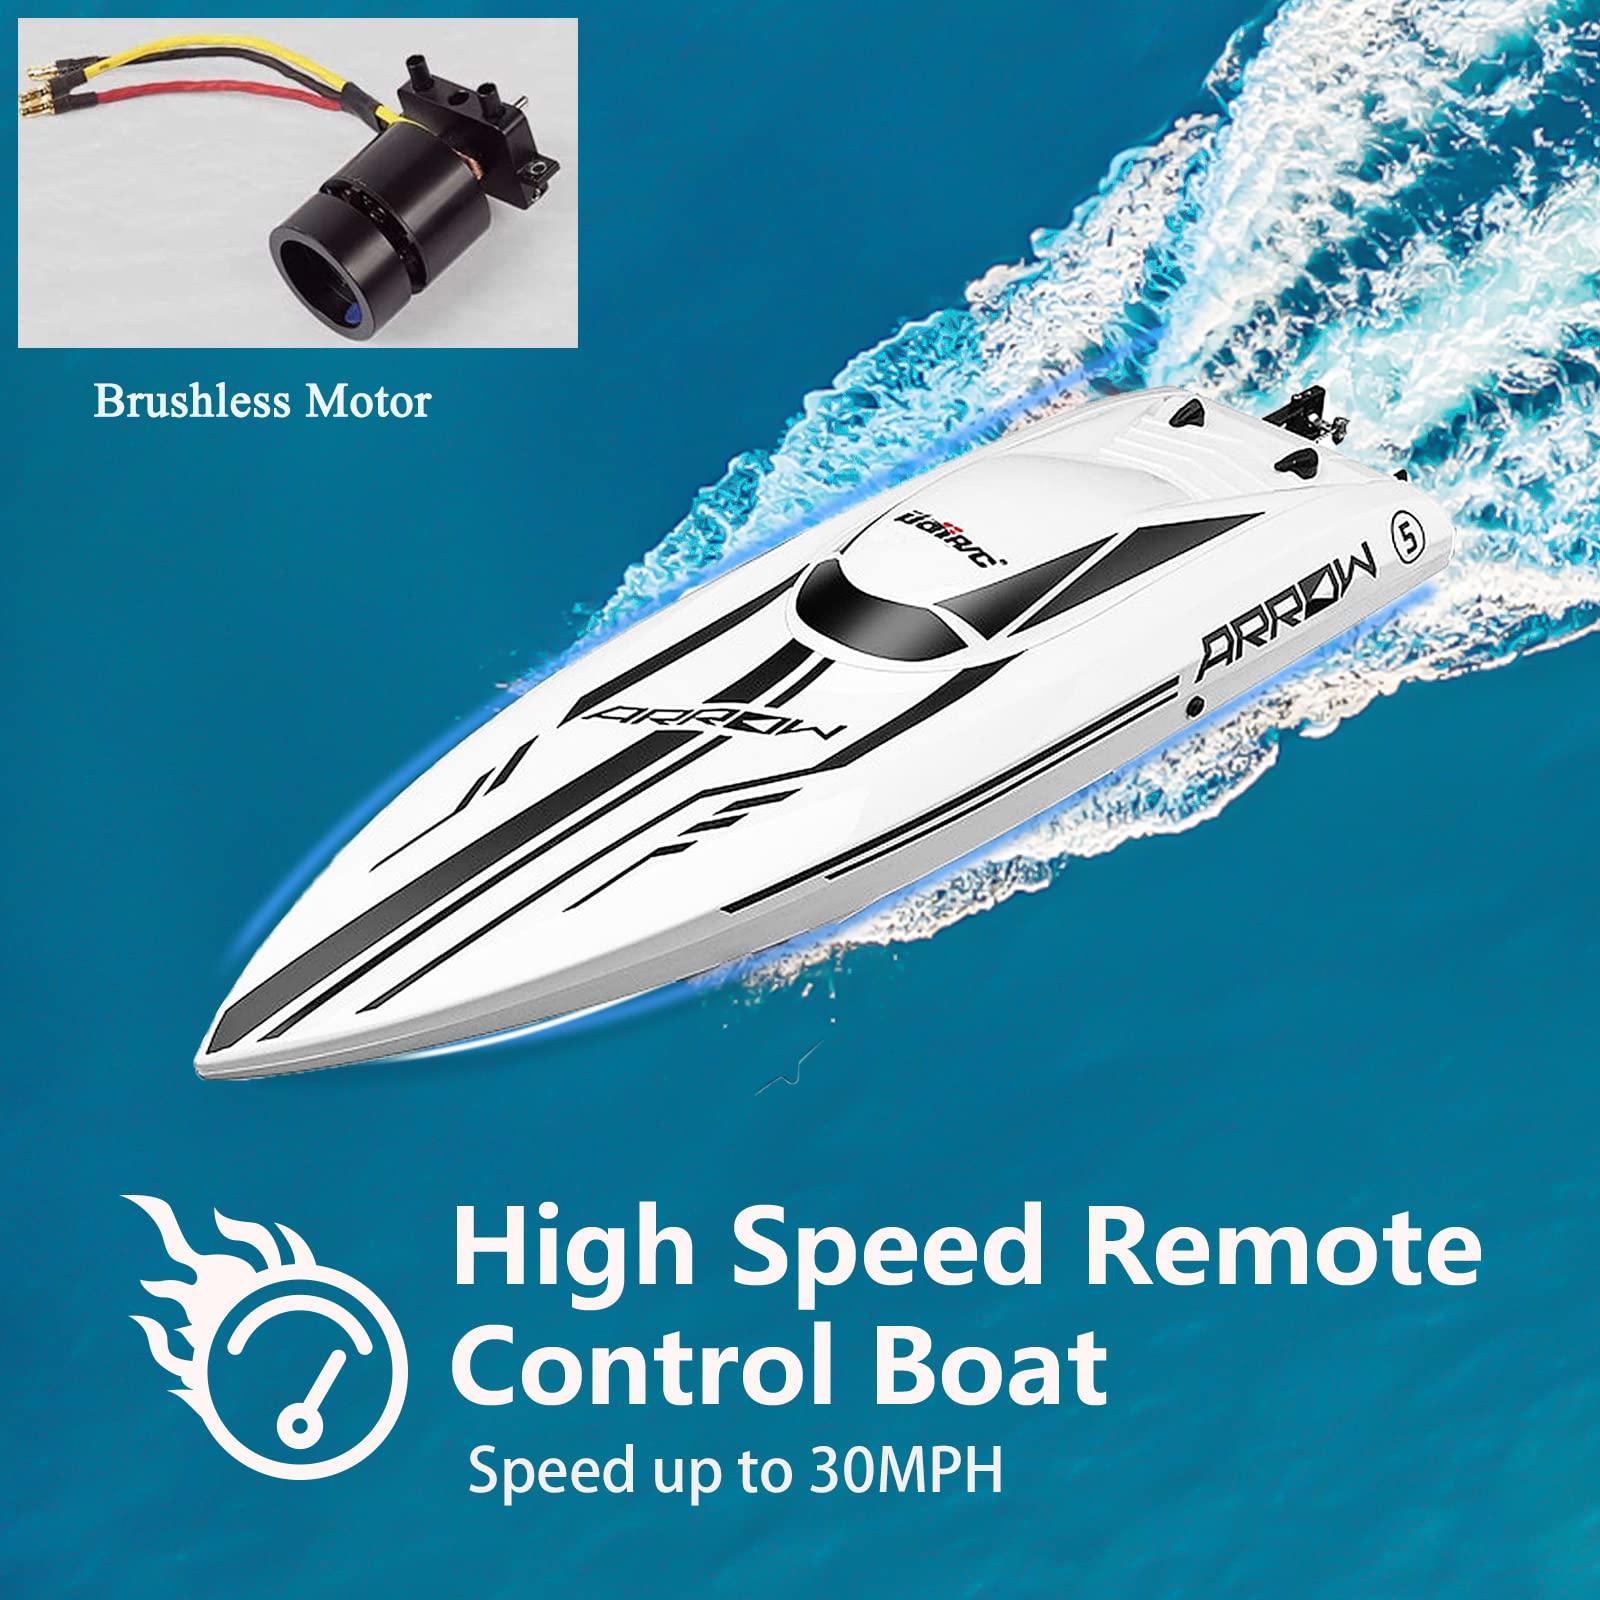 Cheerwing Rc Brushless High Speed Boat: Positive Customer Reviews for Cheerwing RC Brushless High Speed Boat